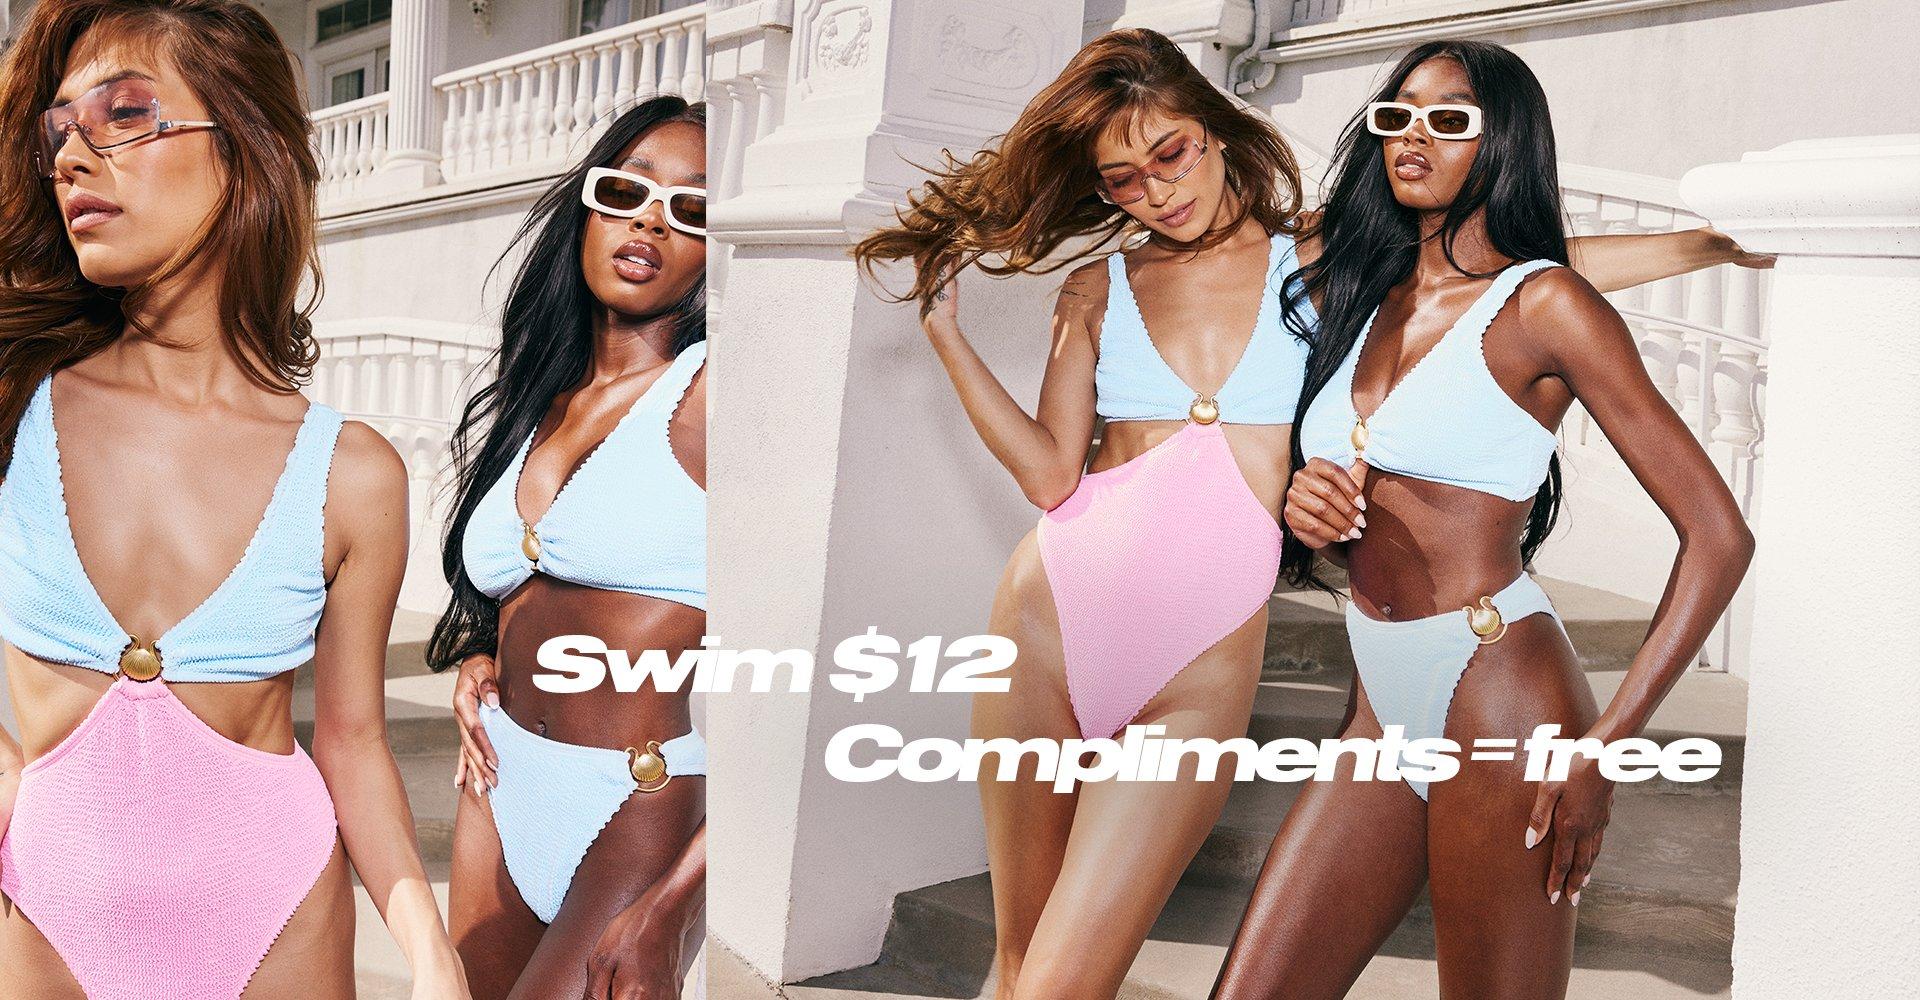 Swim from $10. Compliments = free